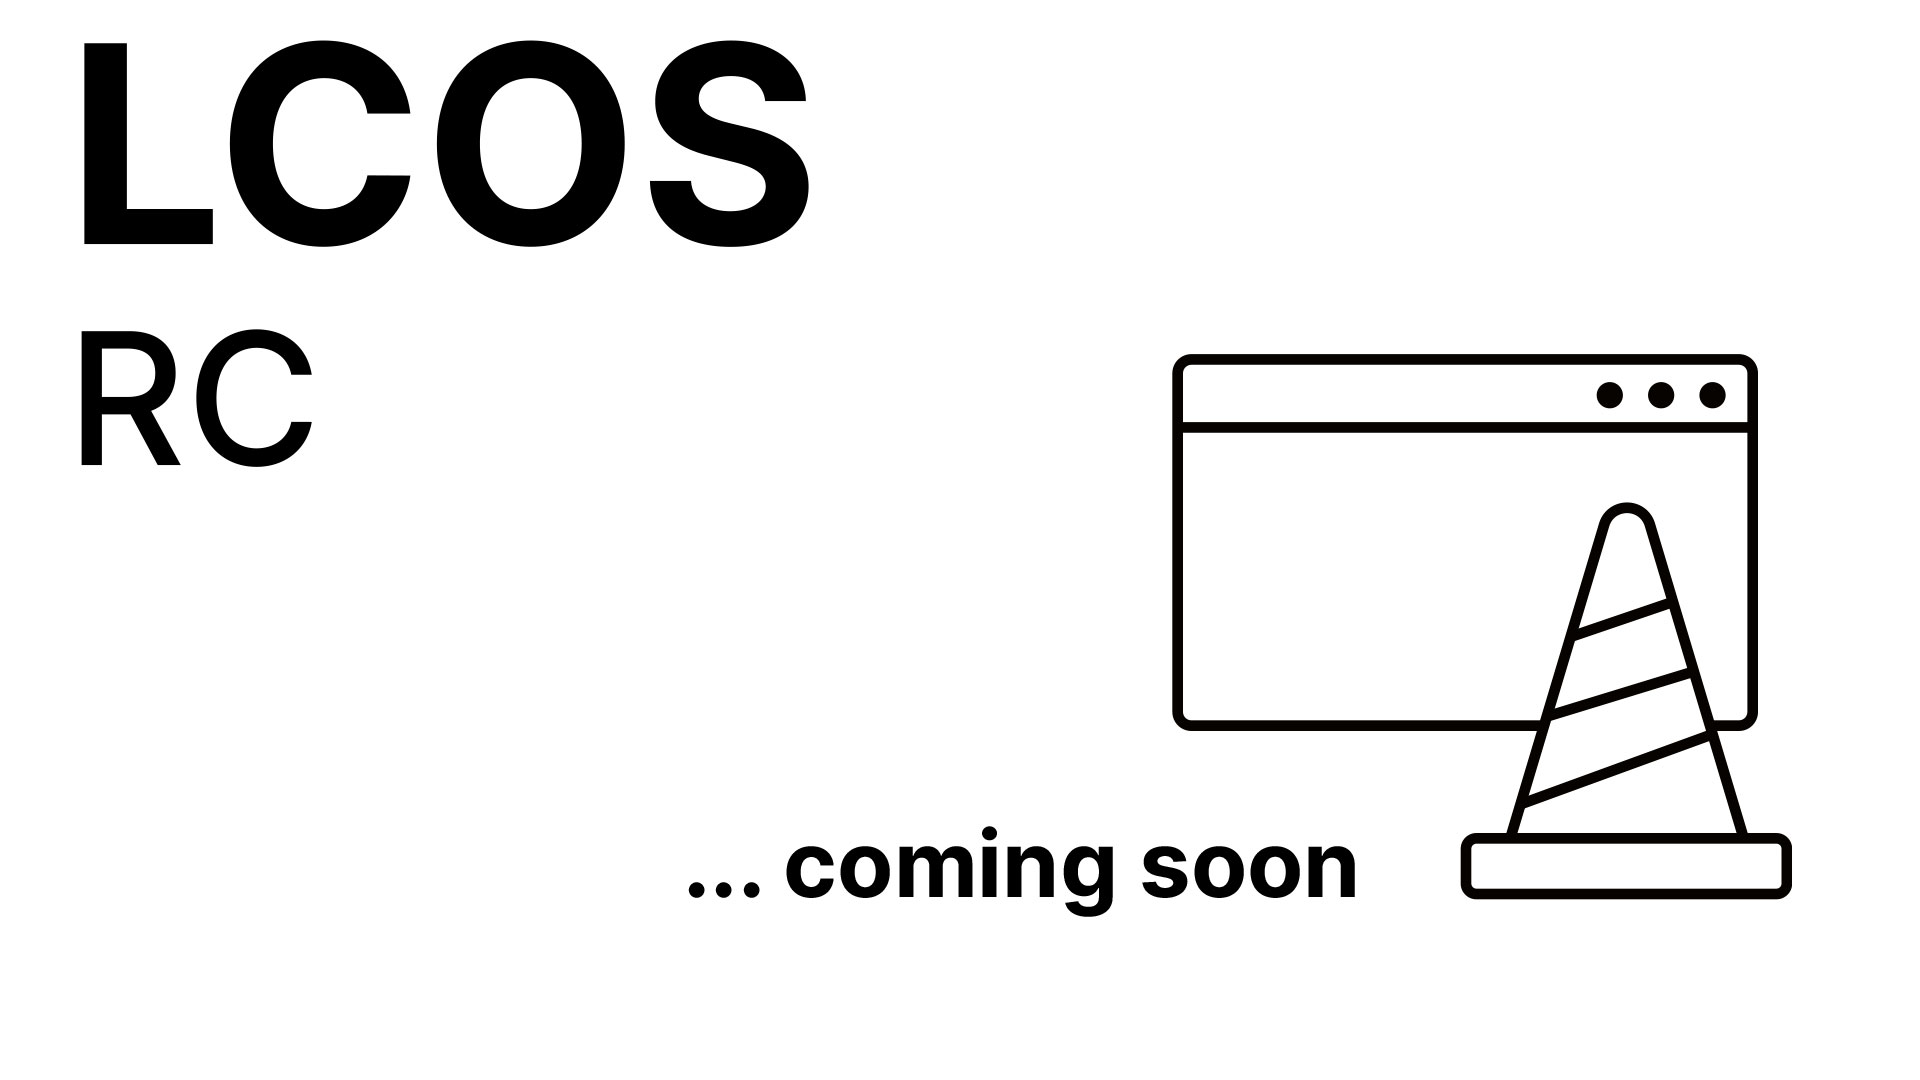 Covered LCOS Release Candidate logo saying "coming soon"